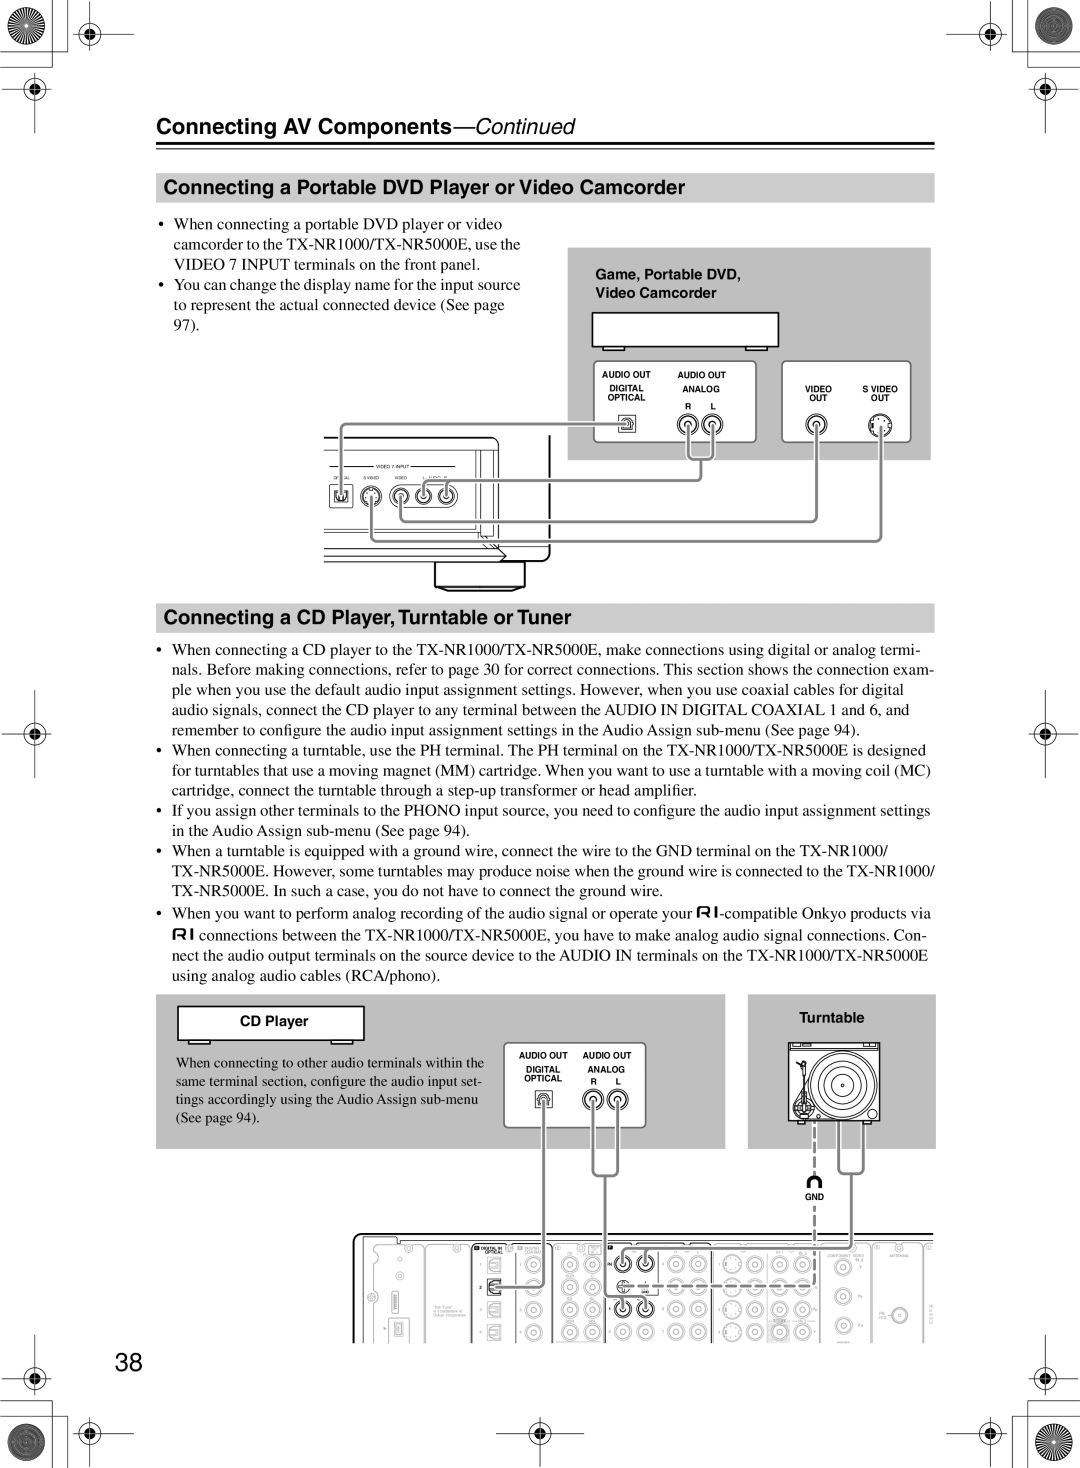 Onkyo TX-NR1000 instruction manual Connecting a CD Player, Turntable or Tuner, Connecting AV Components-Continued 